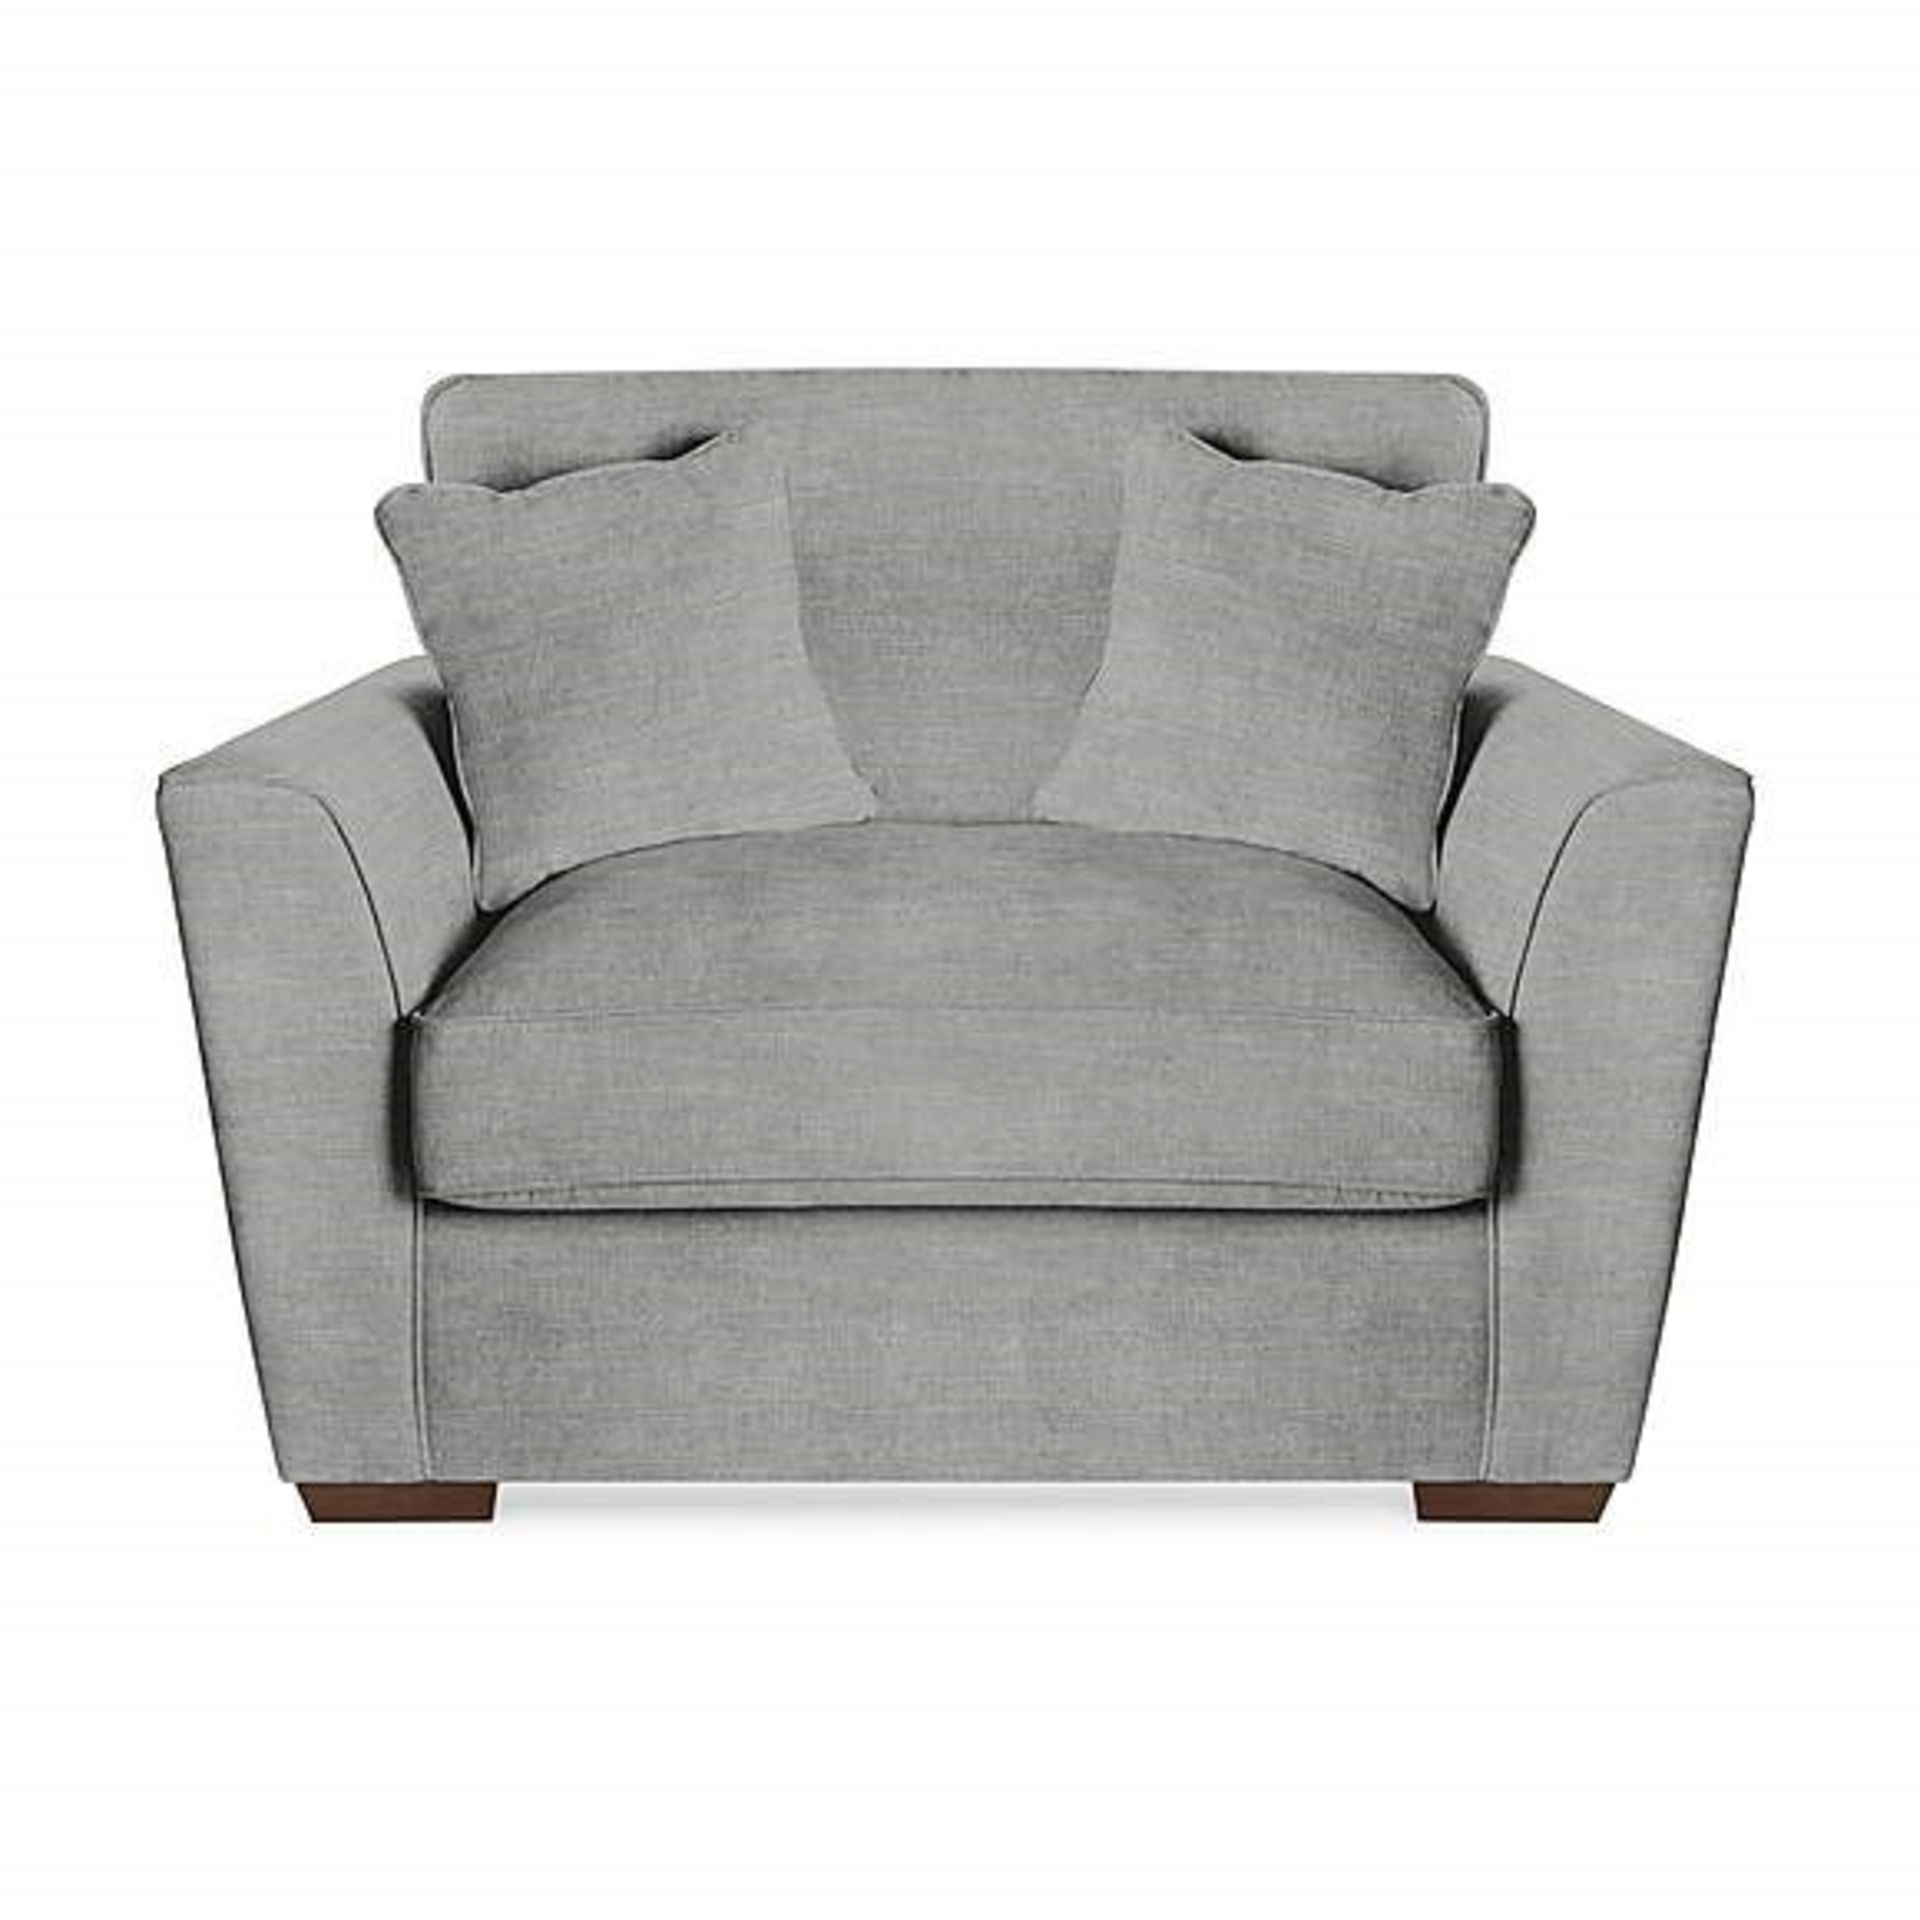 1 BRAND NEW BAGGED DUNELM GROSVENOR SNUGGLE CHAIR IN NORFOLK GREY (VIEWING HIGHLY RECOMMENDED)